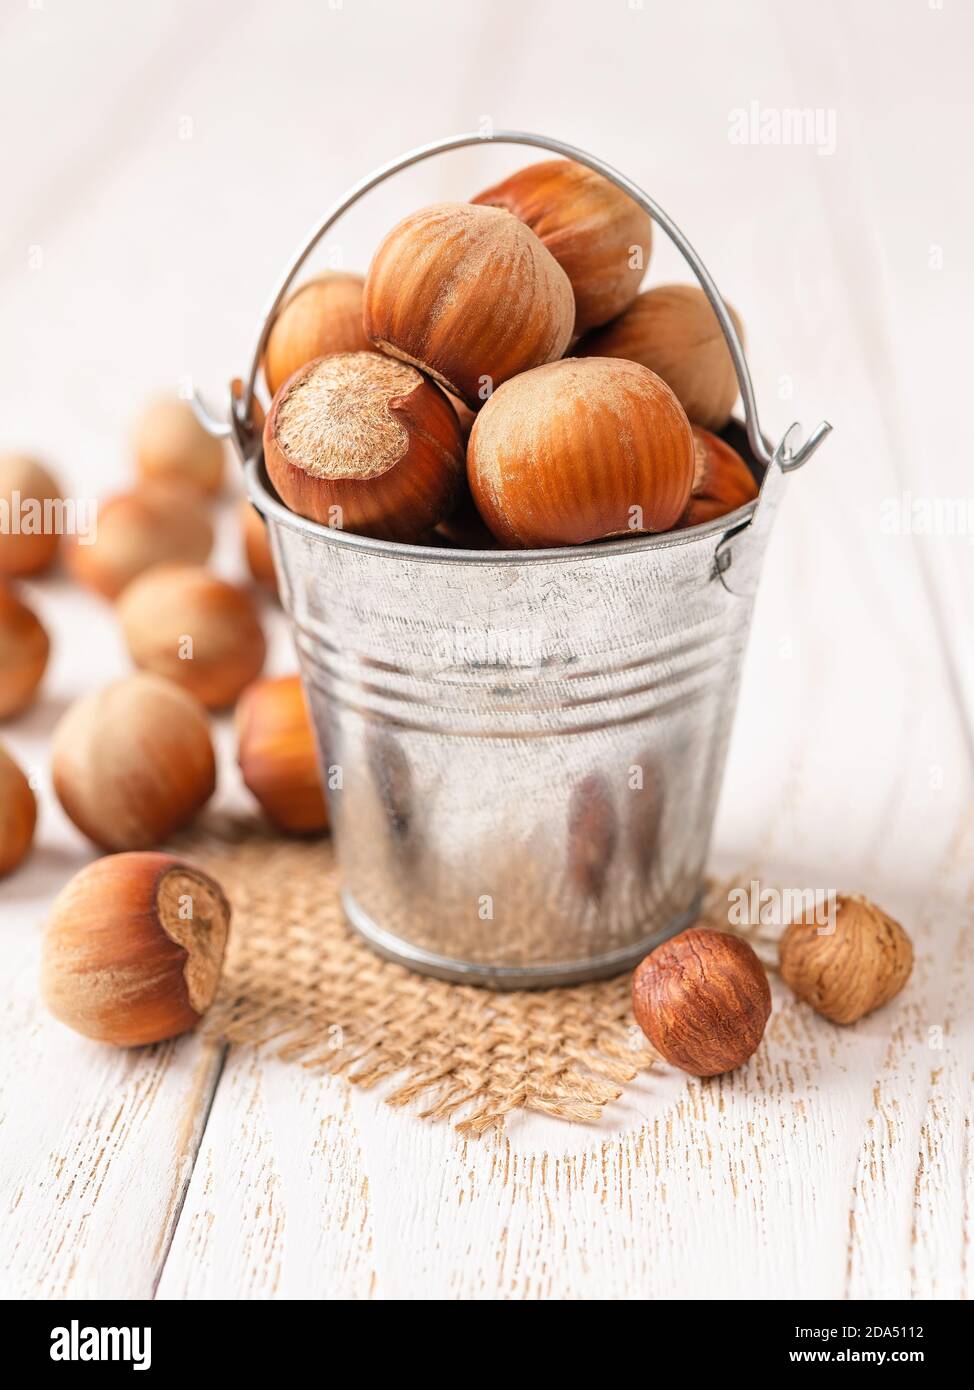 Hazelnuts in a small metal bucket over white wood table. Healthy vegetarian eating, antioxidant and protein source. Ketogenic and raw food diets. Crop Stock Photo